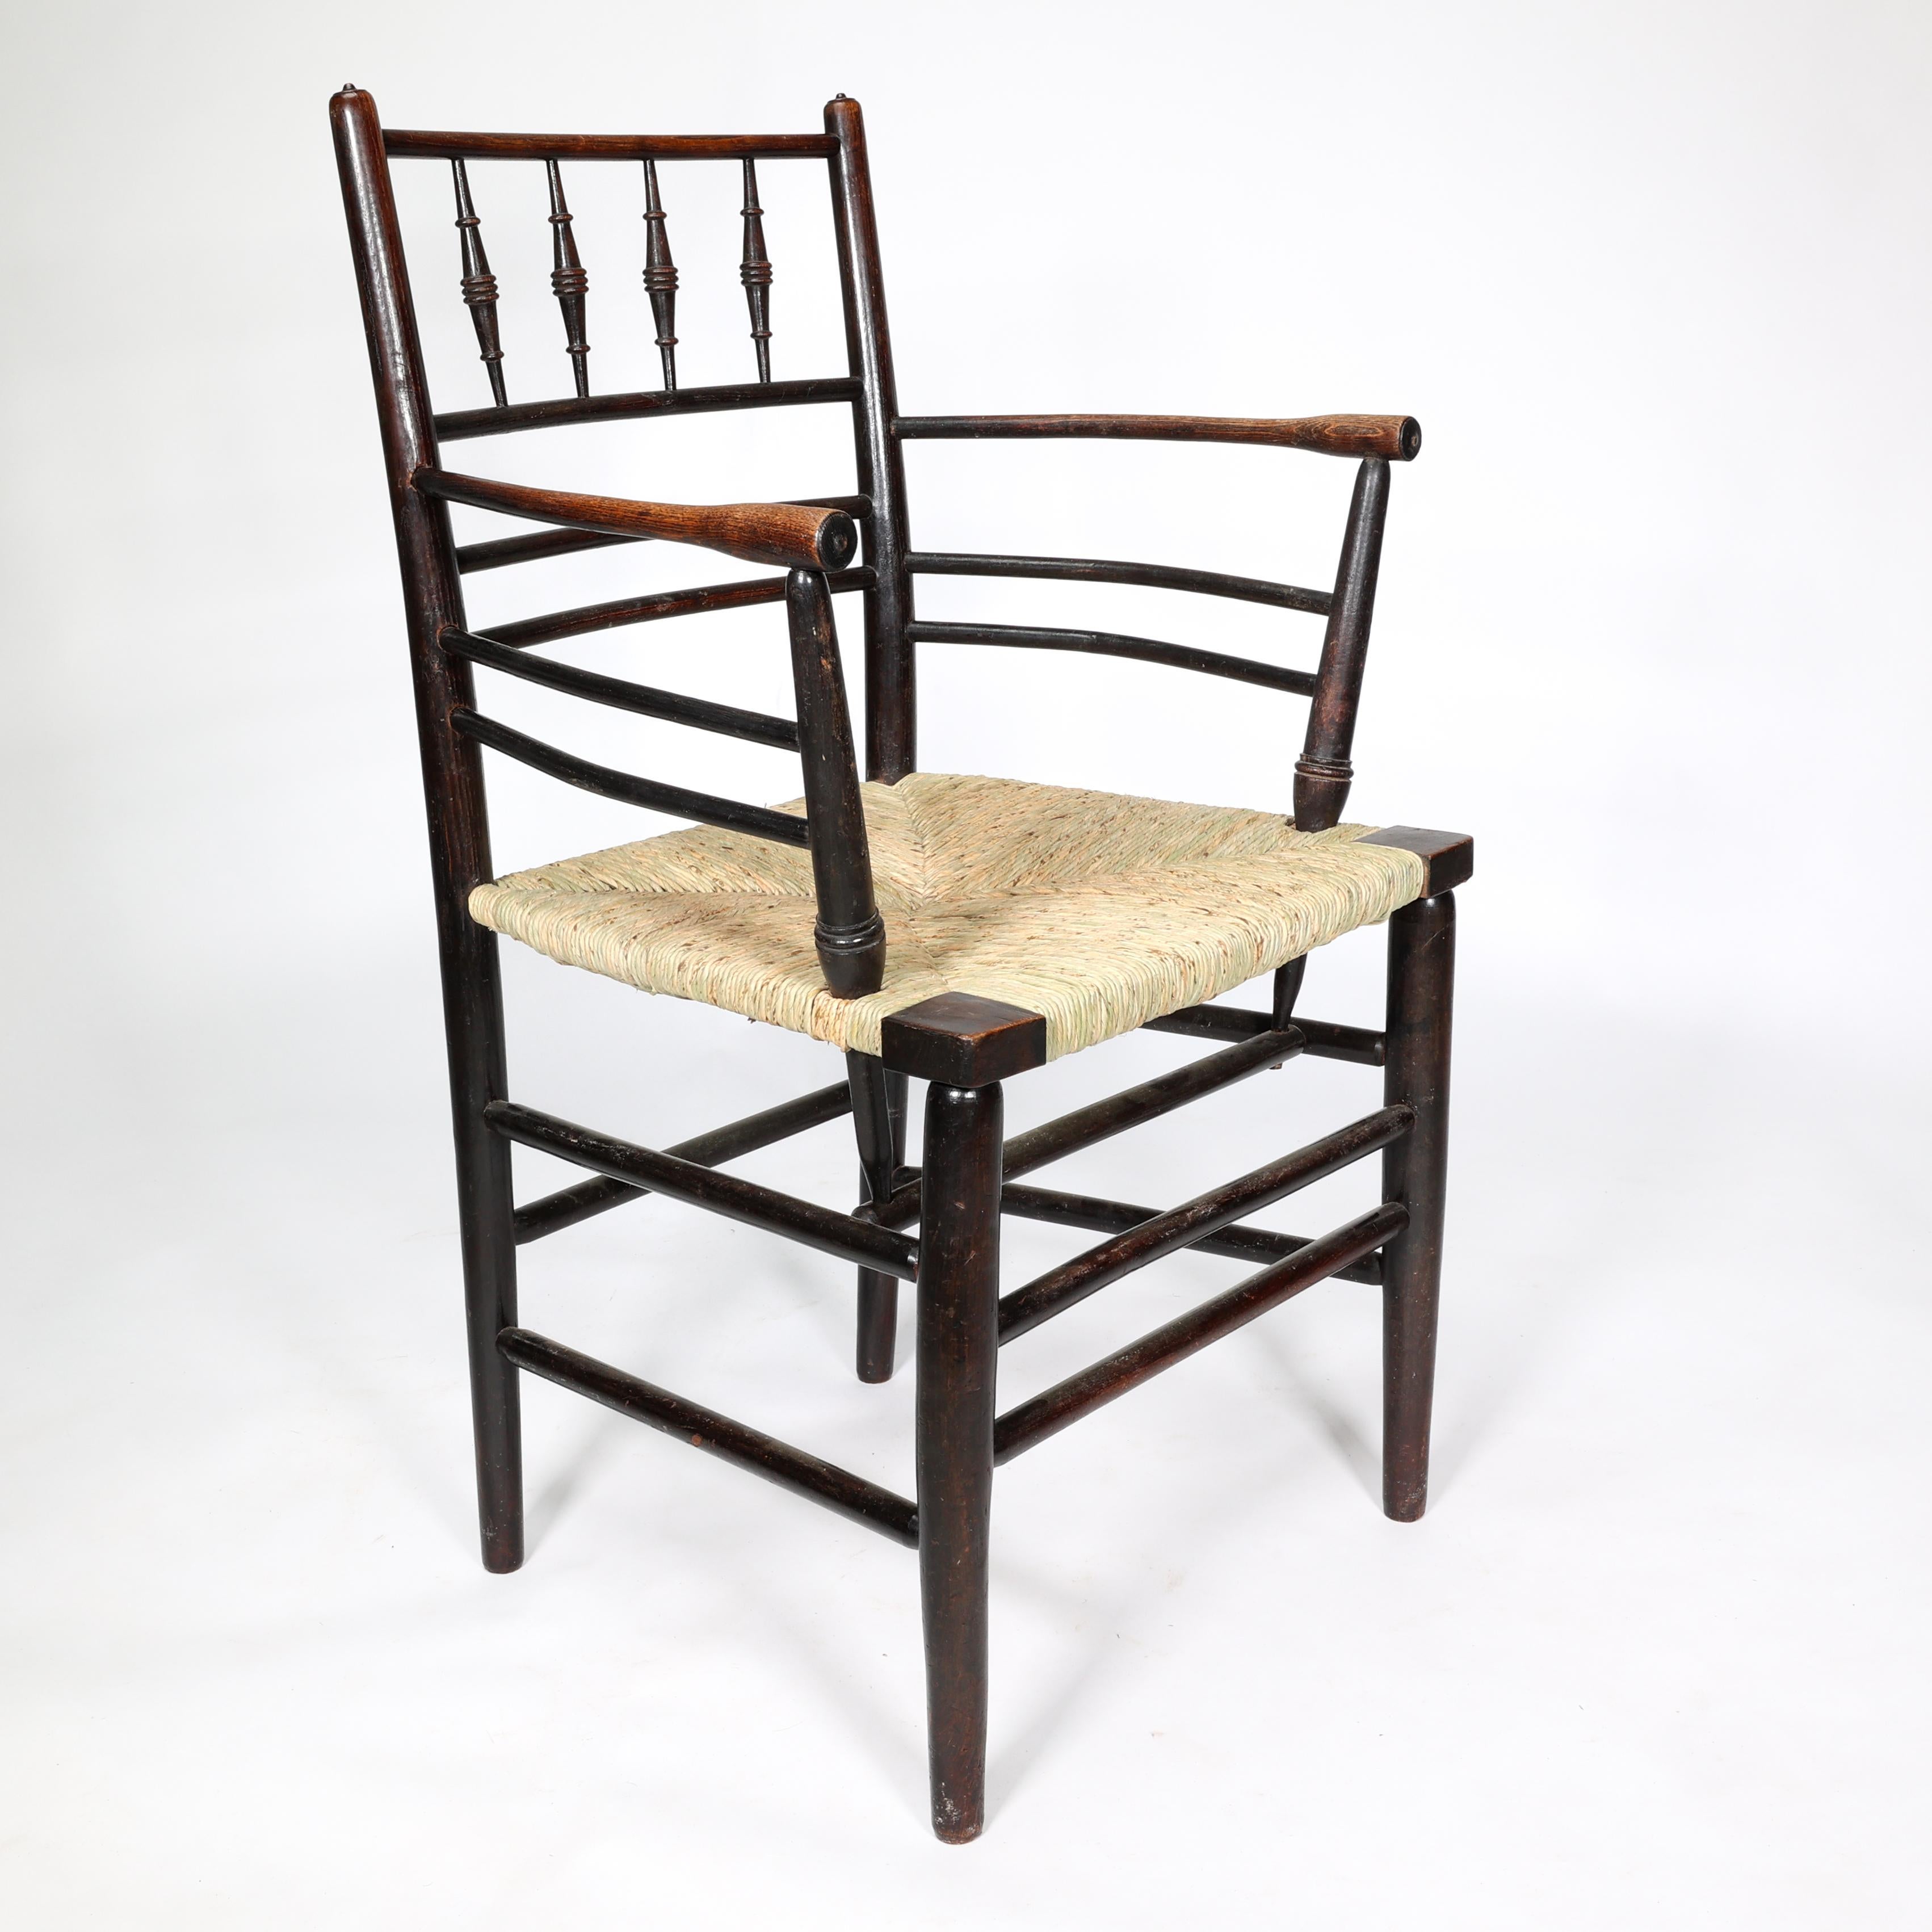 William Morris,  A classic Sussex Arts & Crafts ebonised armchair from the Sussex range.
Fully restored with a new rush seat. 
We have been restoring Sussex armchairs for over 30 years and to be fully restored correctly with a new rush seat, we